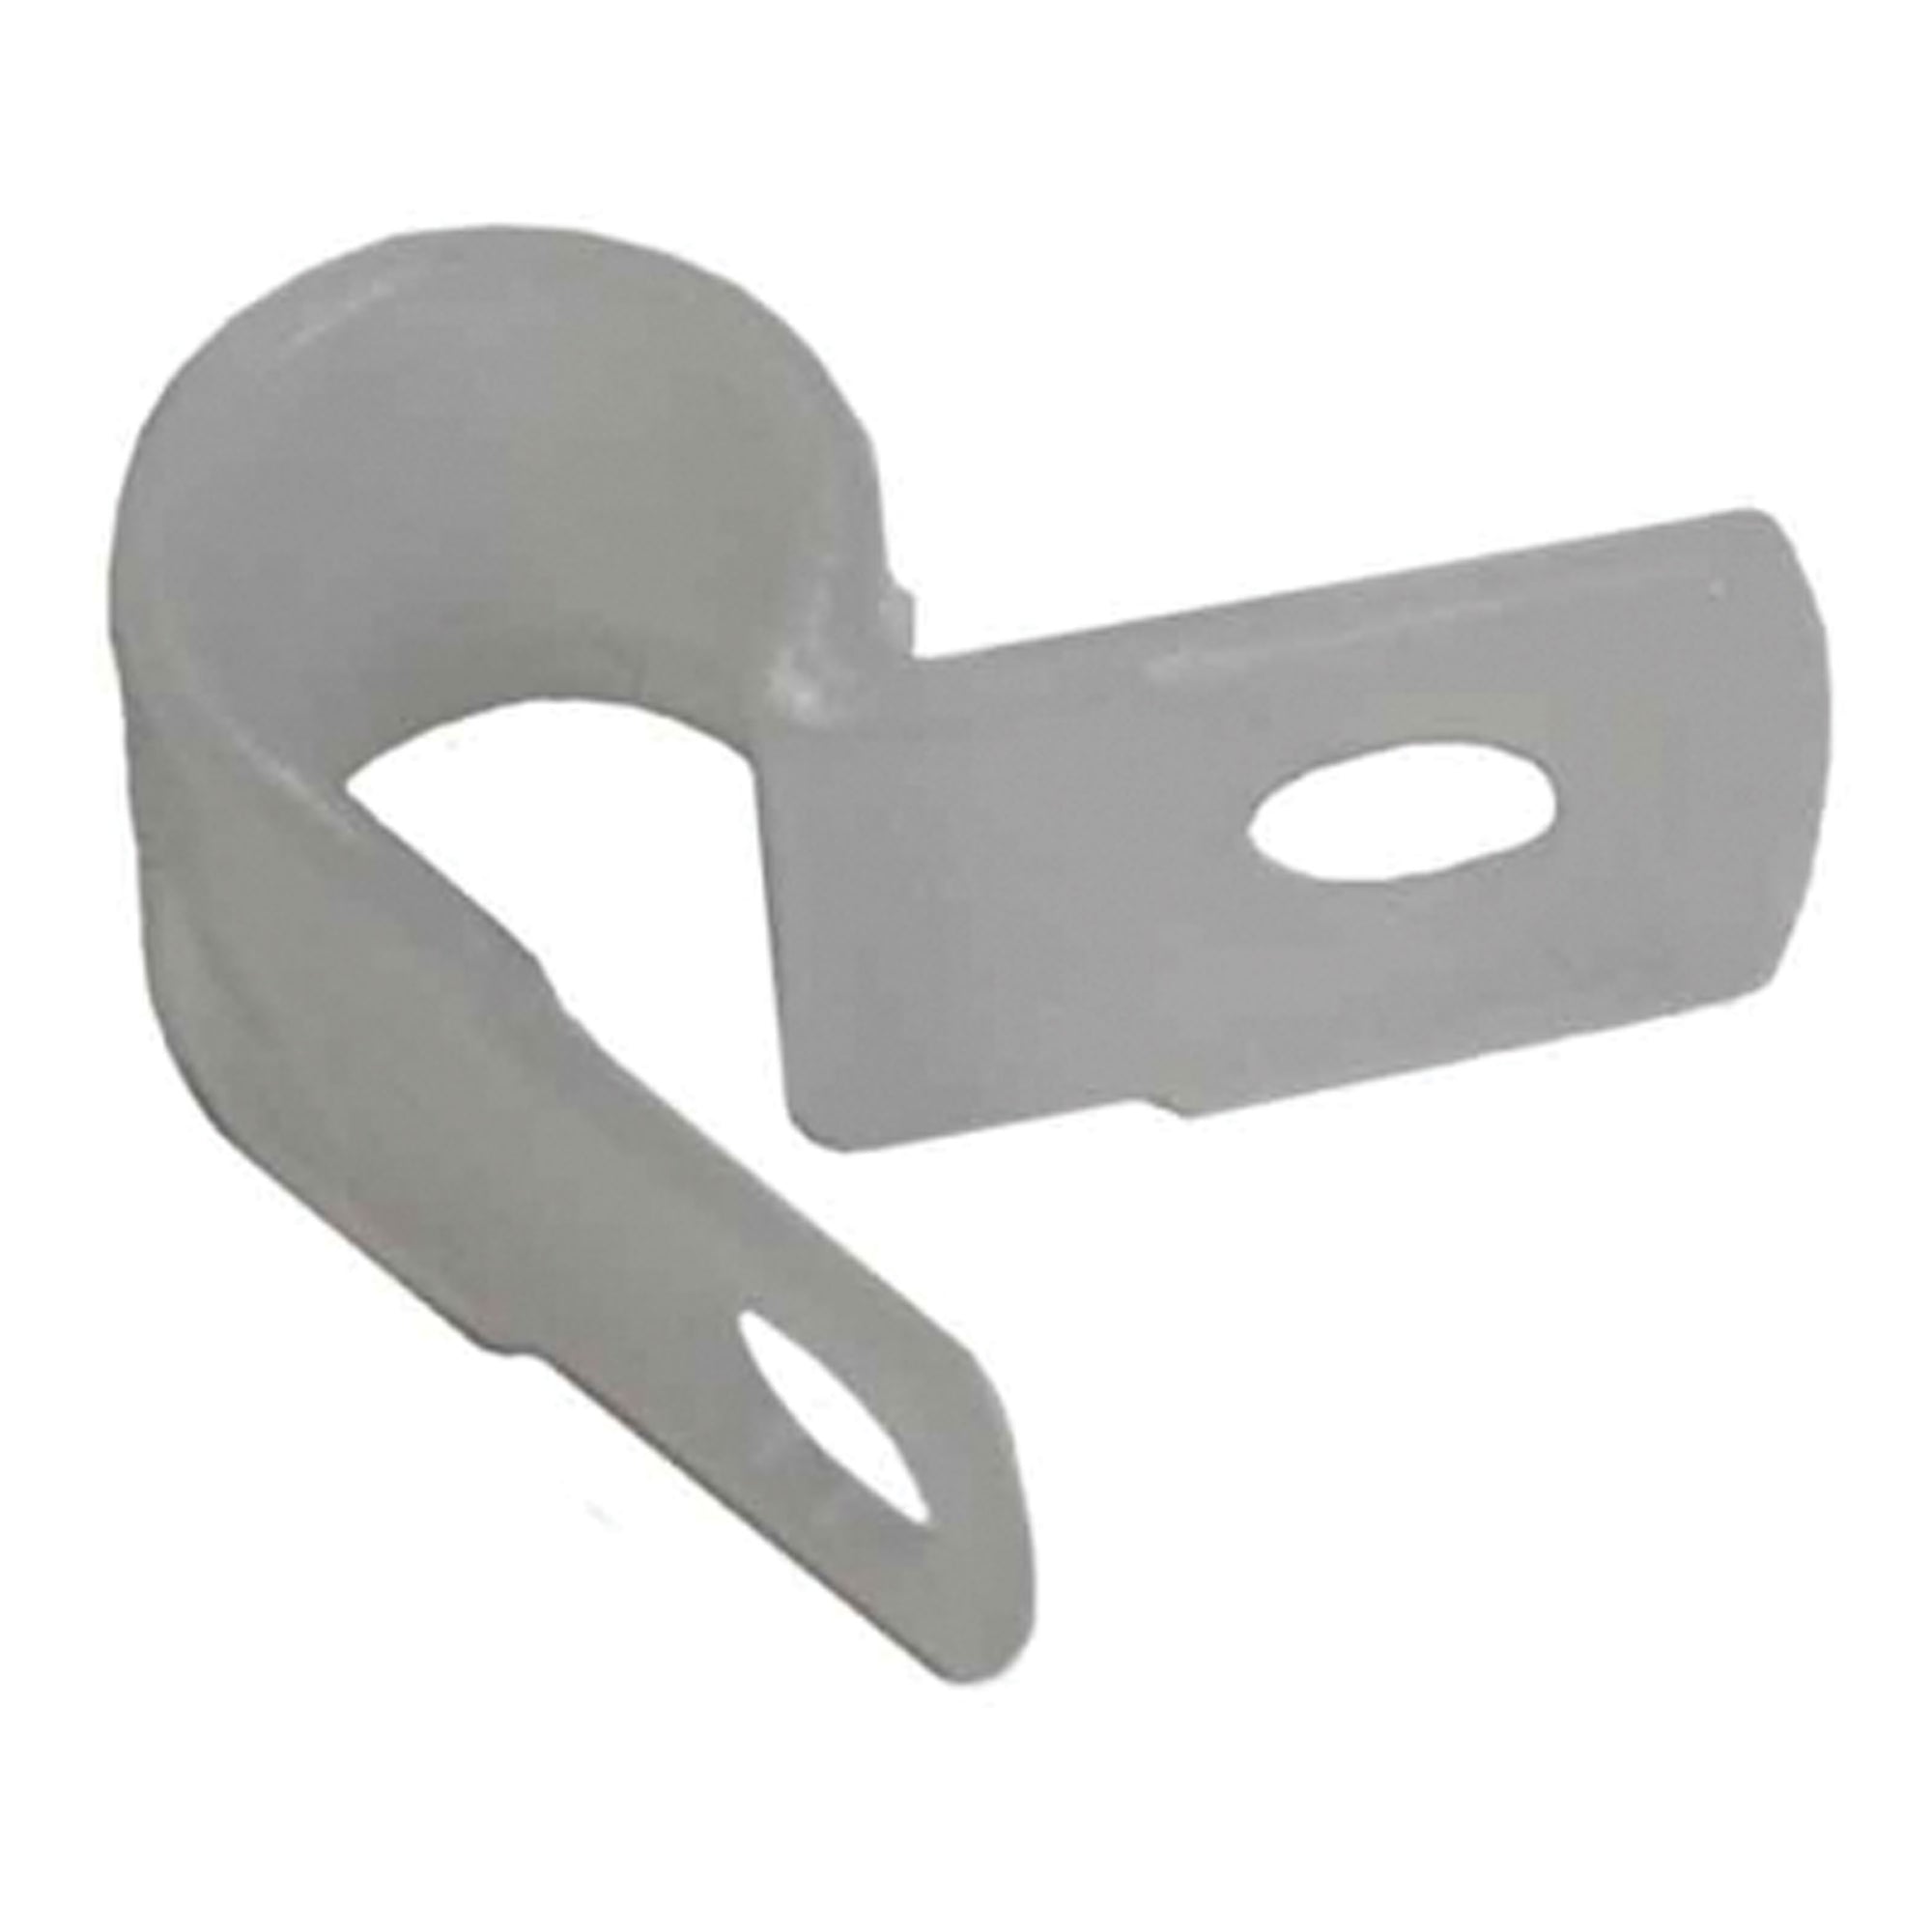 WirthCo 80867 Nylon Clamp - #10 Stud, 3/16" Size, Pack of 25